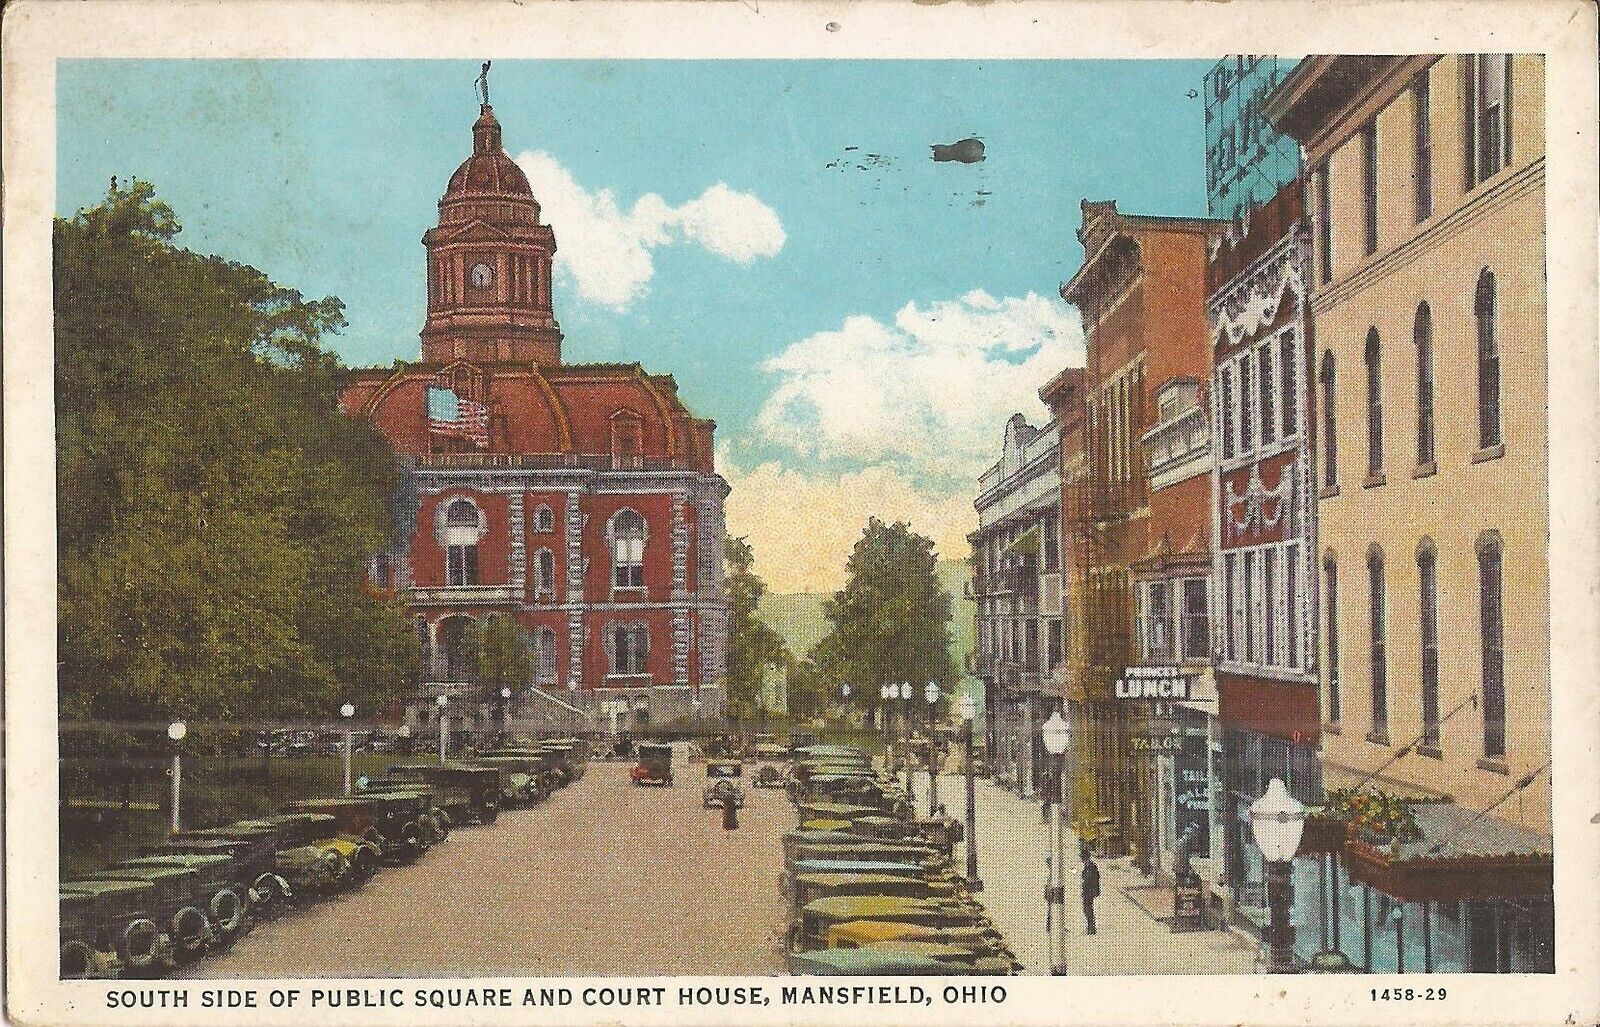 Mansfield, OHIO - Public Square & Court House - 1935 - old cars, sign, lamppost